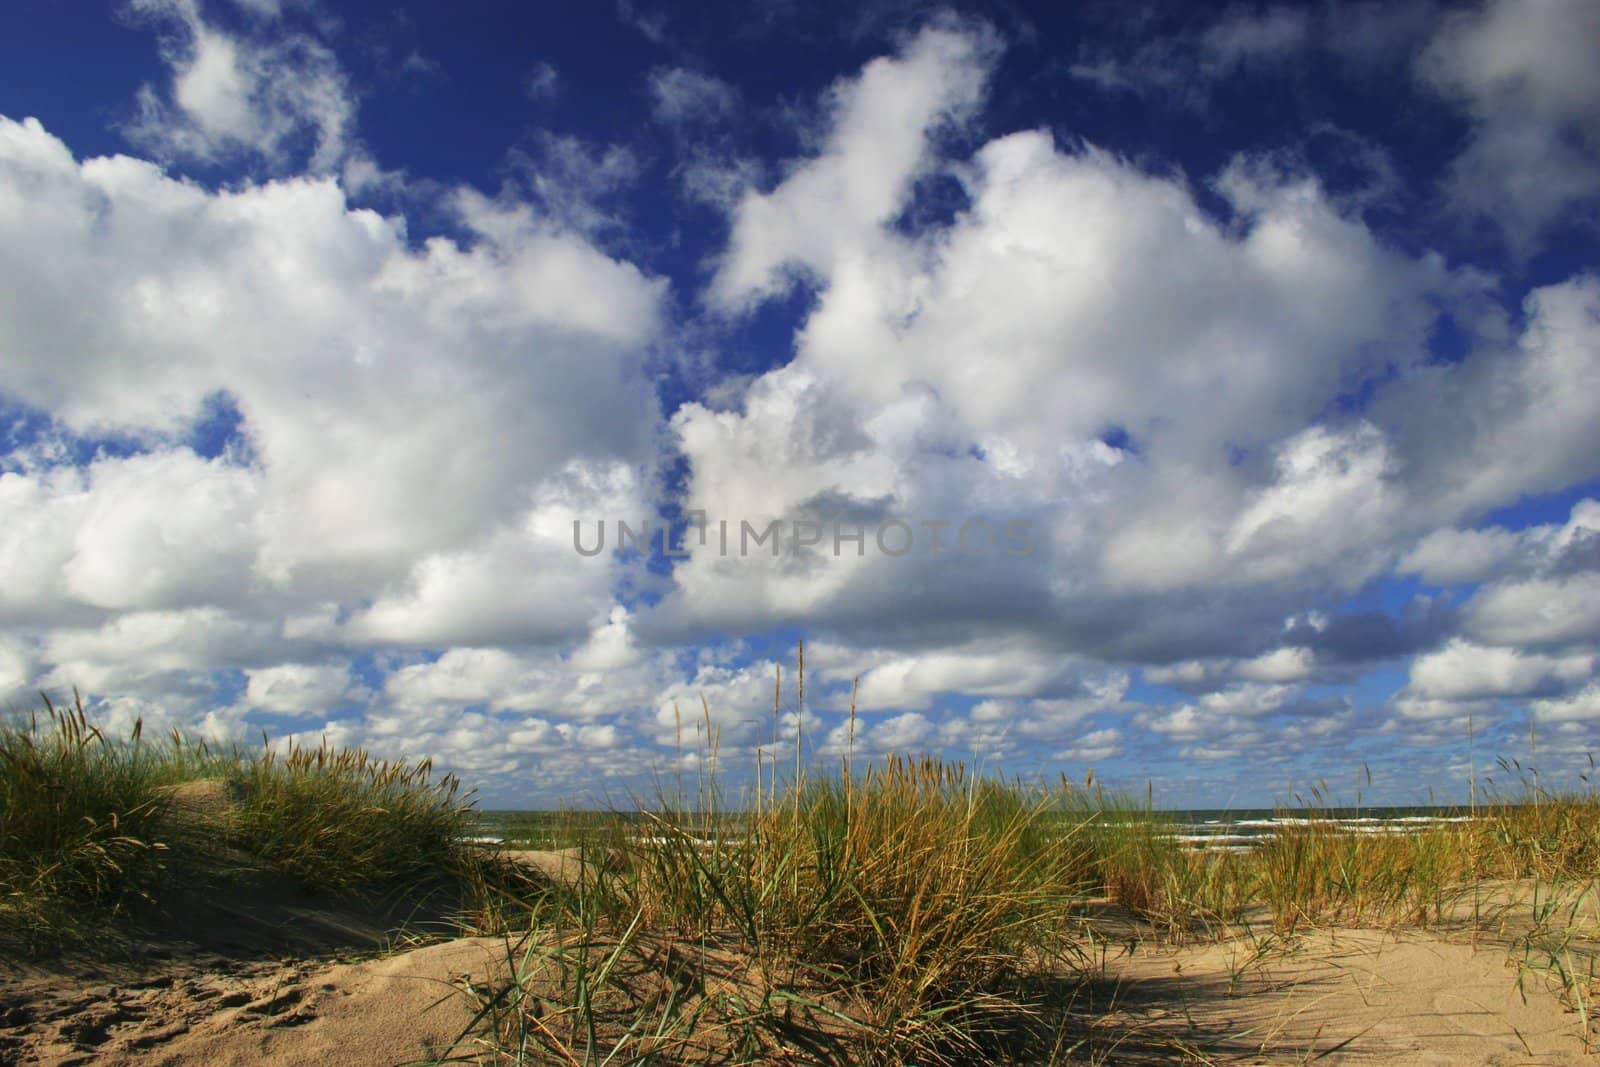 Dunes with green grass. Blue sky with white clouds